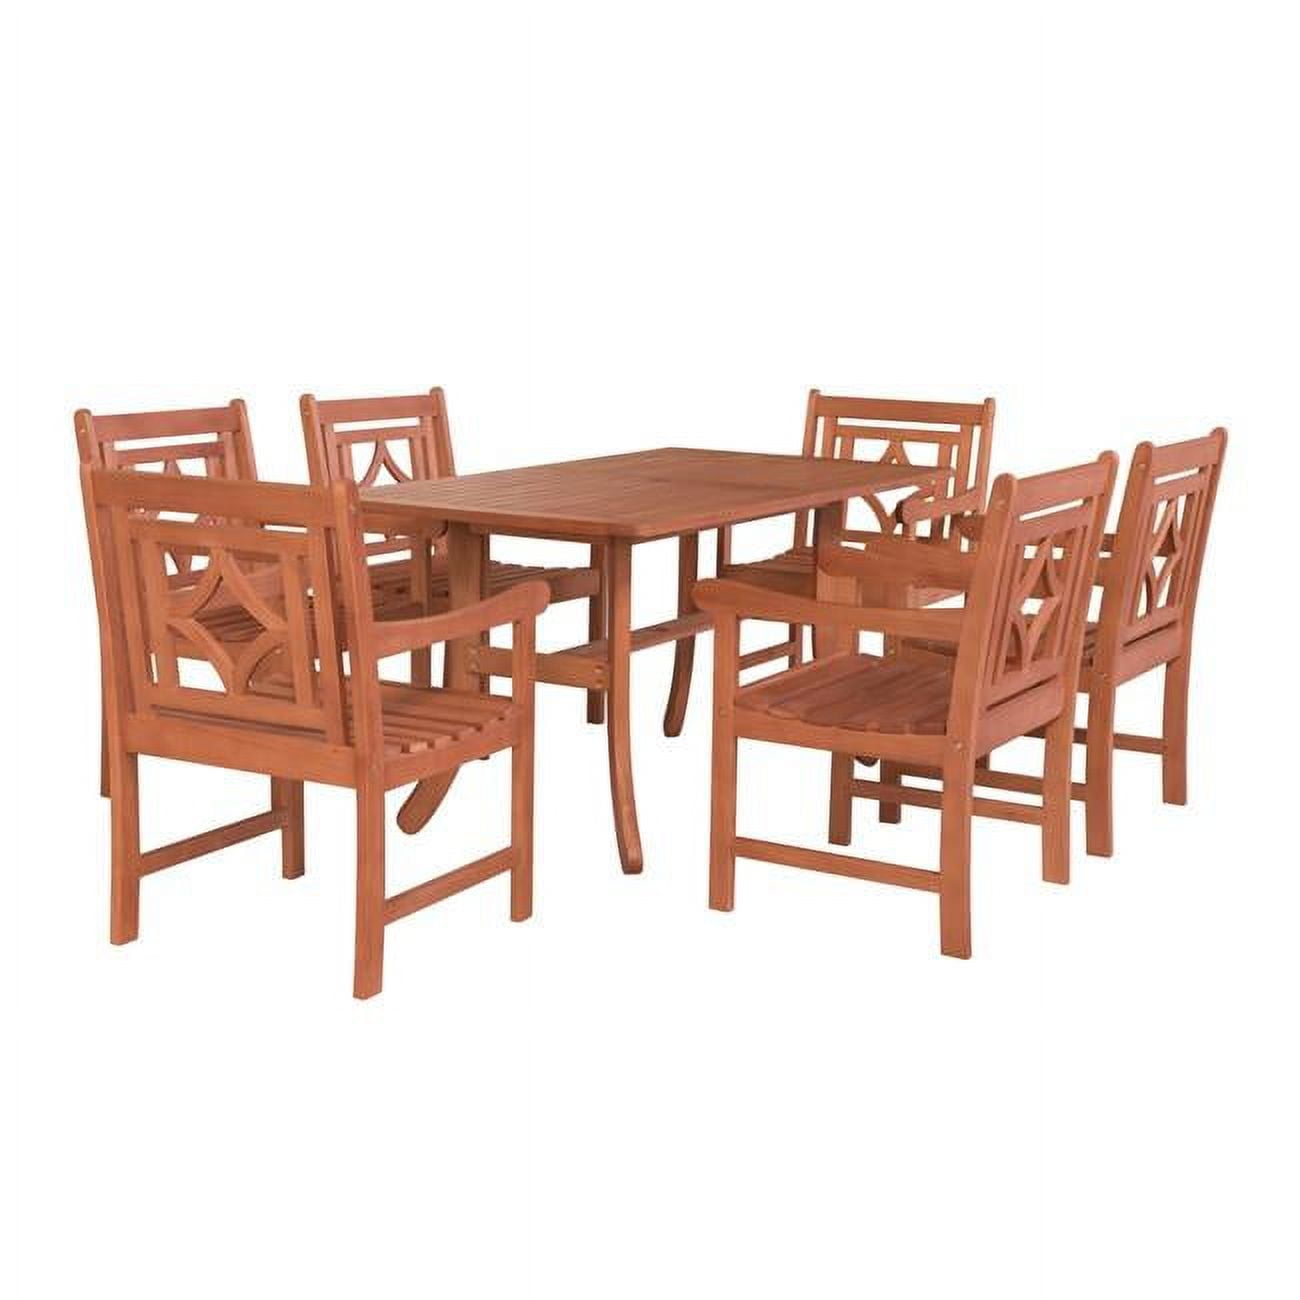 V189set39 Malibu Outdoor Wood Patio Curvy Legs Table Dining Set - Natural Wood - 34 X 22 X 24 In. - 7 Piece